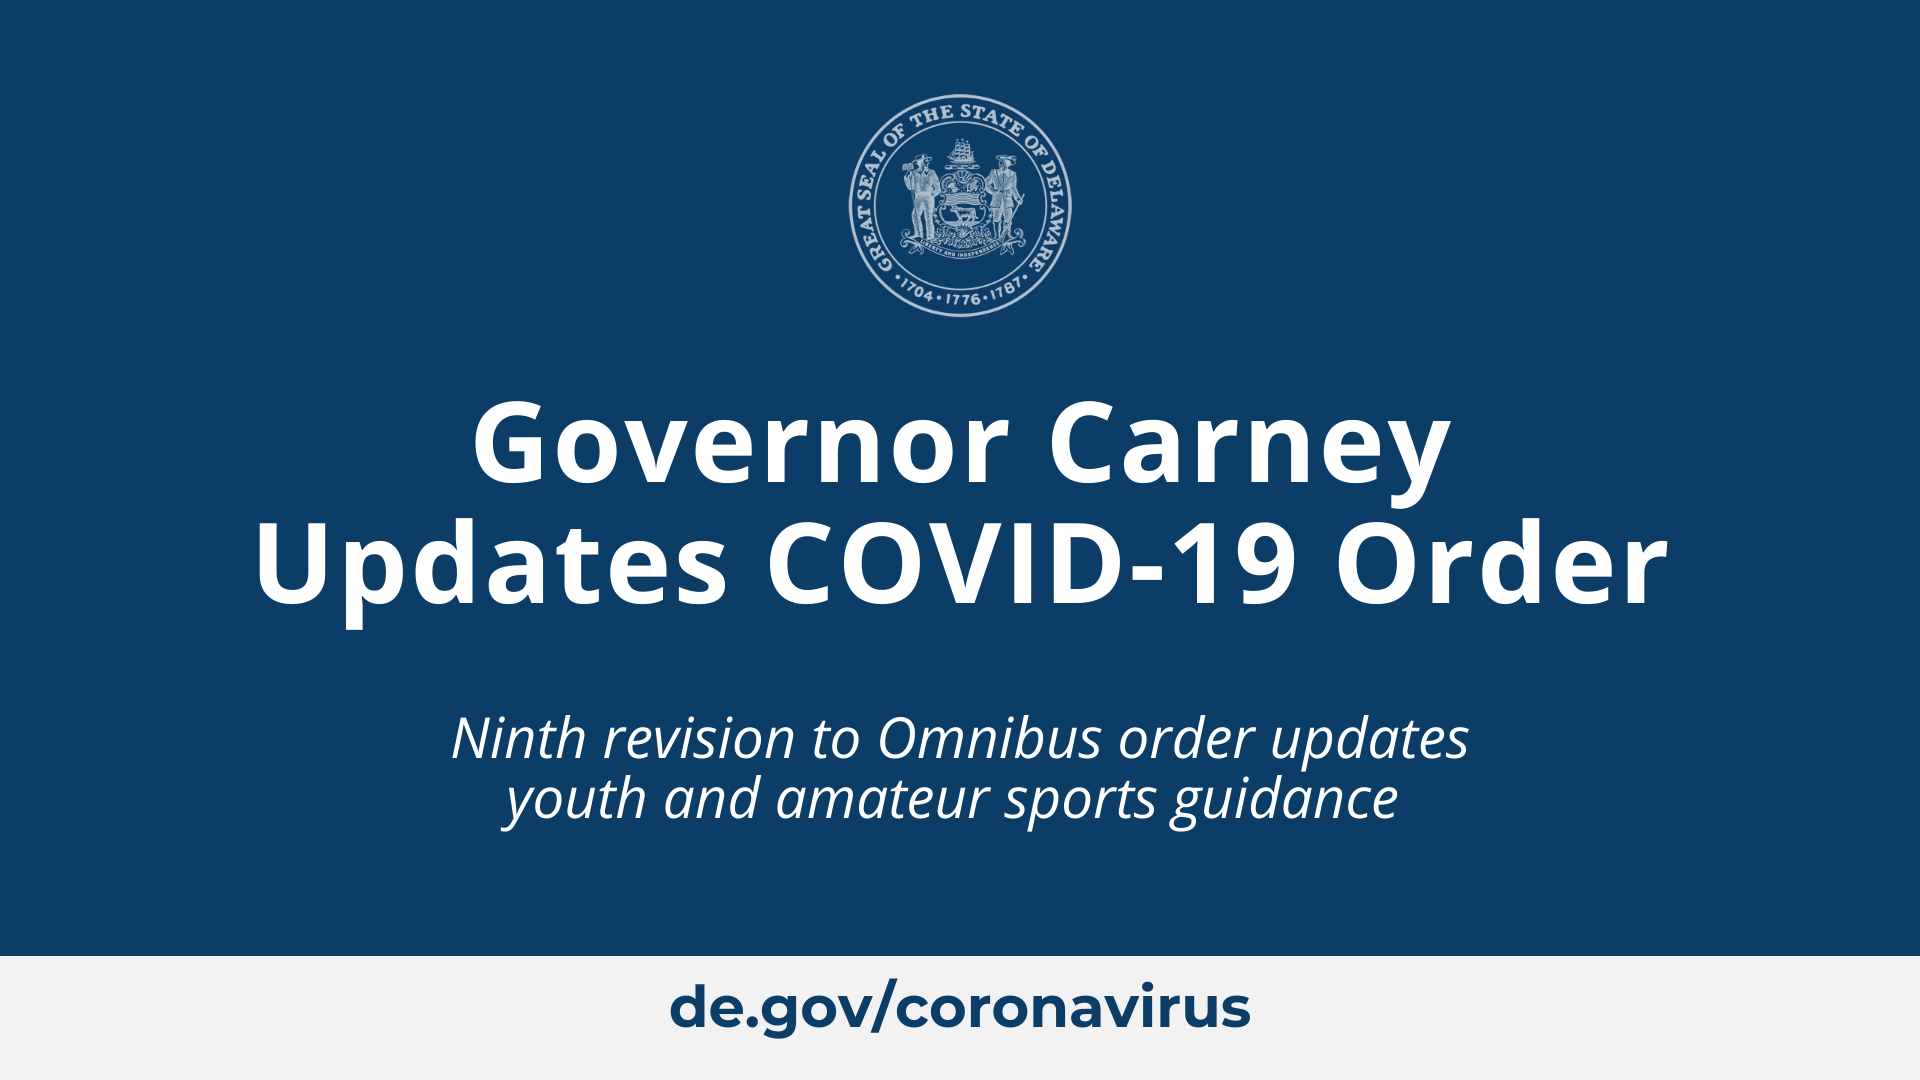 Governor Carney Updates COVID-19 Order